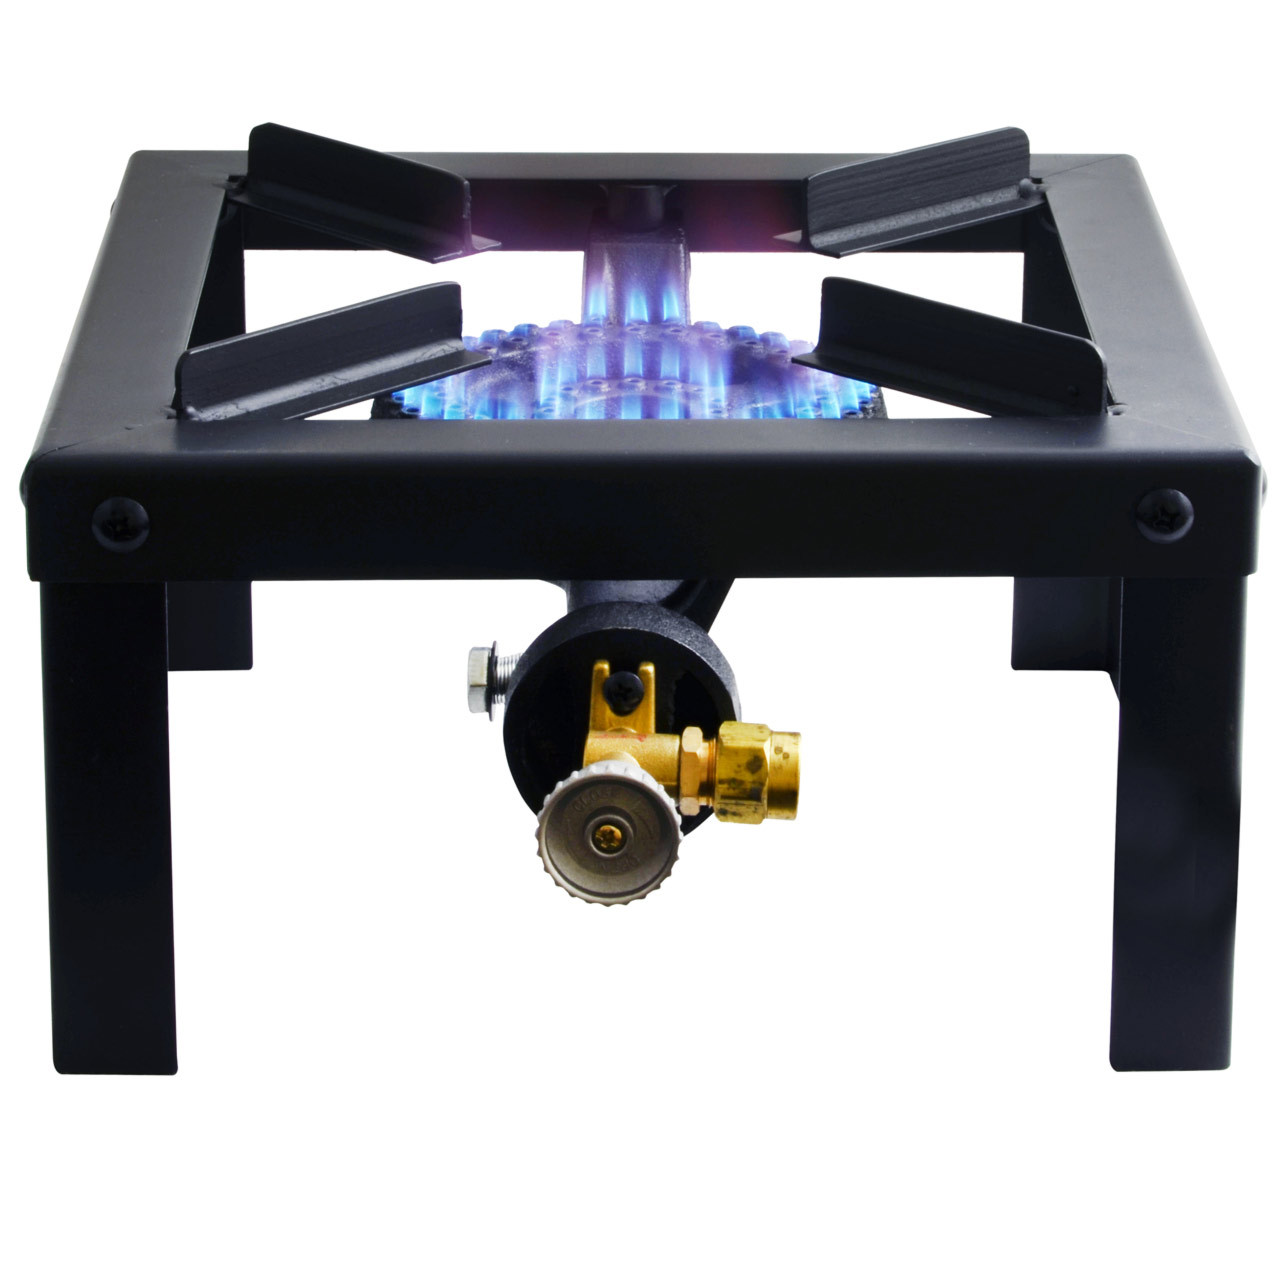 Minimalist Single Stove Top Burner for Small Space